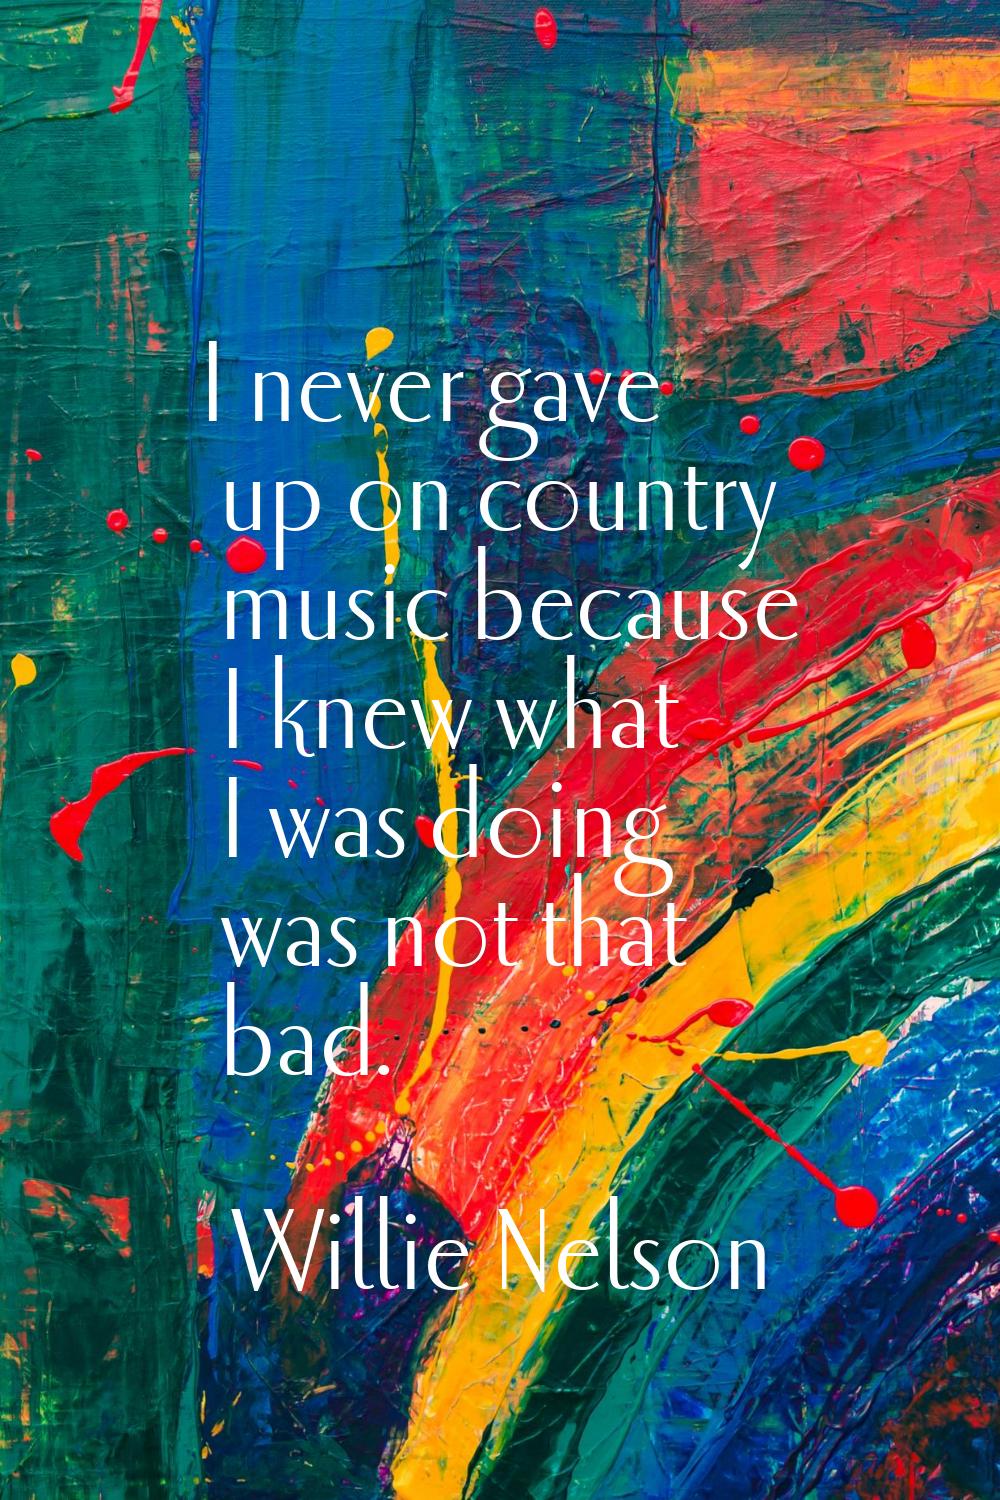 I never gave up on country music because I knew what I was doing was not that bad.